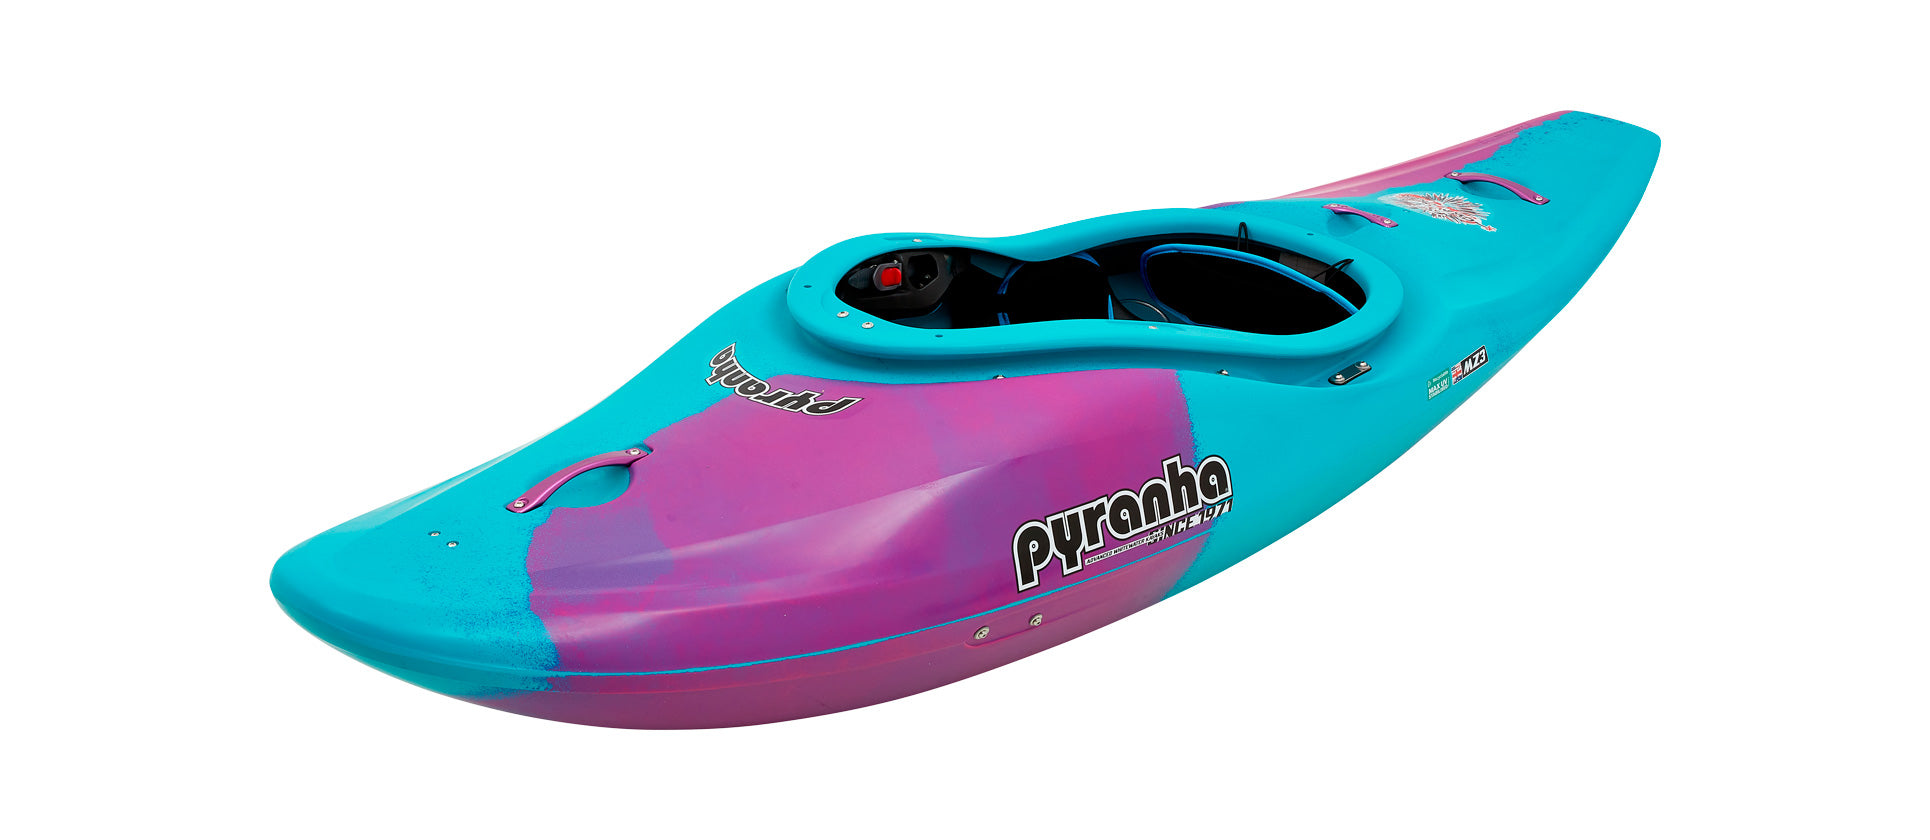 A Firecracker kayak in blue and pink, perfect for paddling adventures, on a white background.